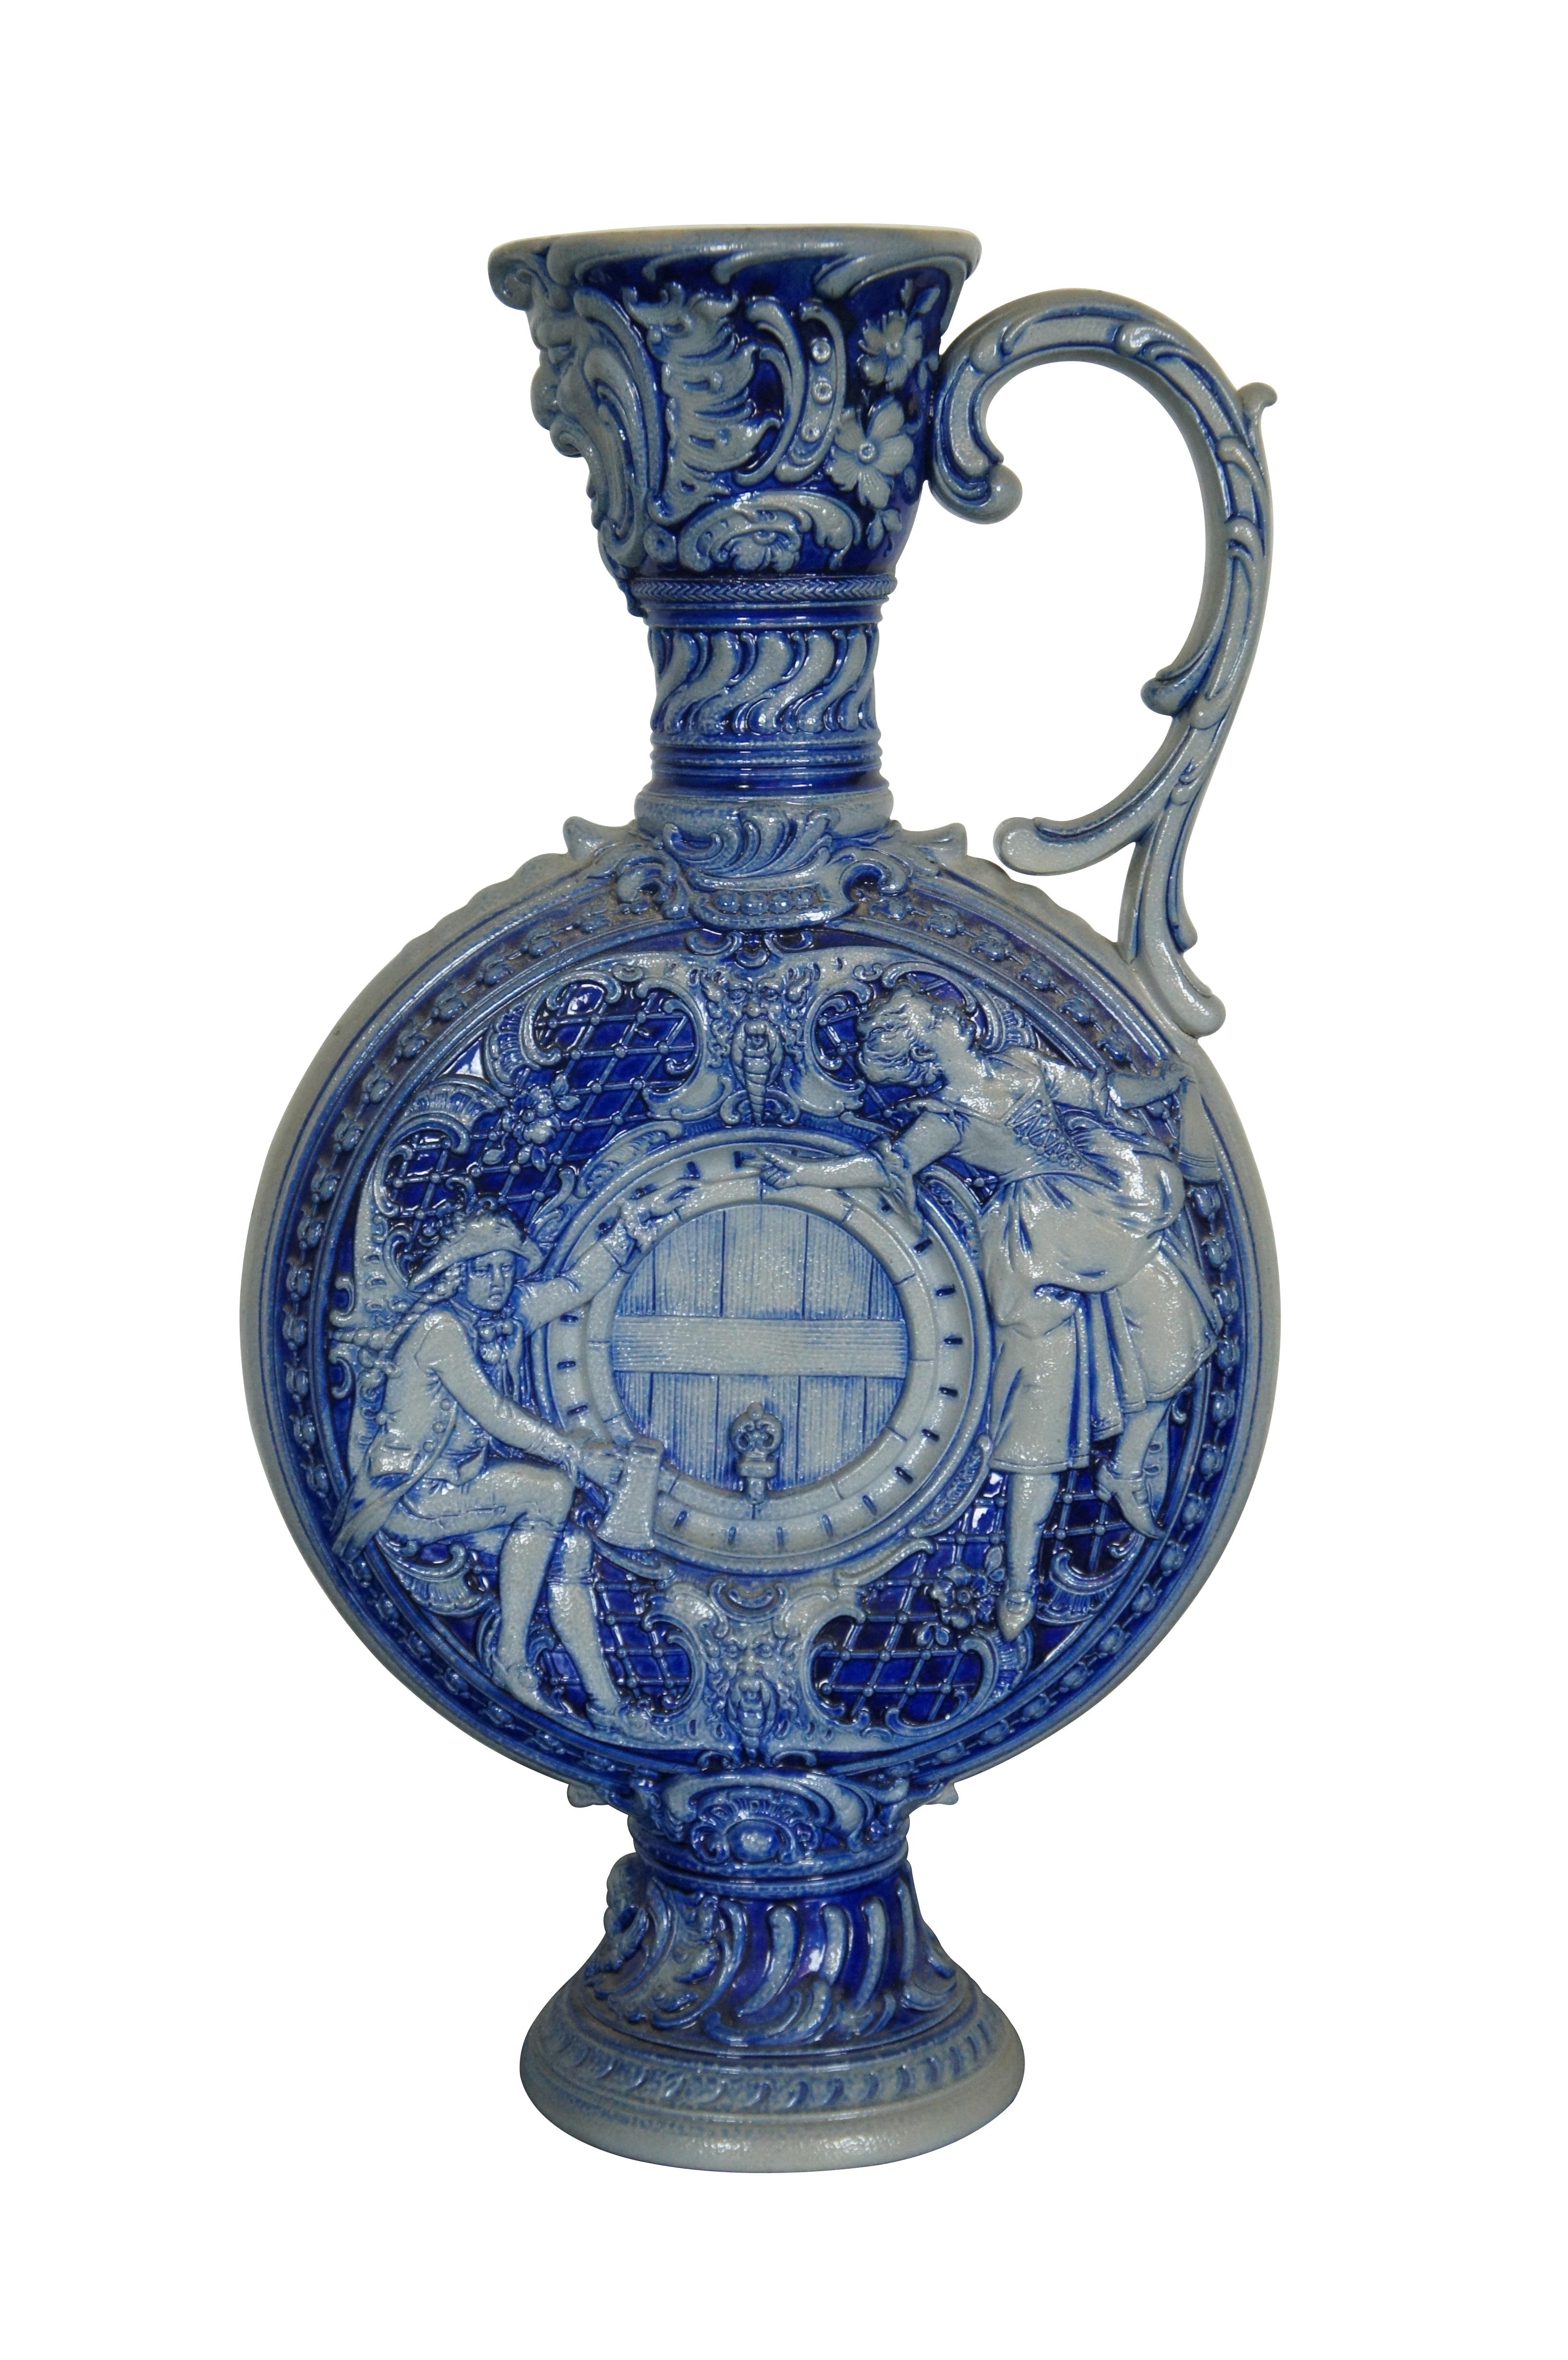 Antique German Westerwald stoneware pottery decanter jug, ewer or pitcher.  Made of cobalt blue salt glaze stoneware featuring Dionysus / Bacchus, cherubs, a drunk man drinking next to a barrel and a woman dancing with her stein.  Marked Germany